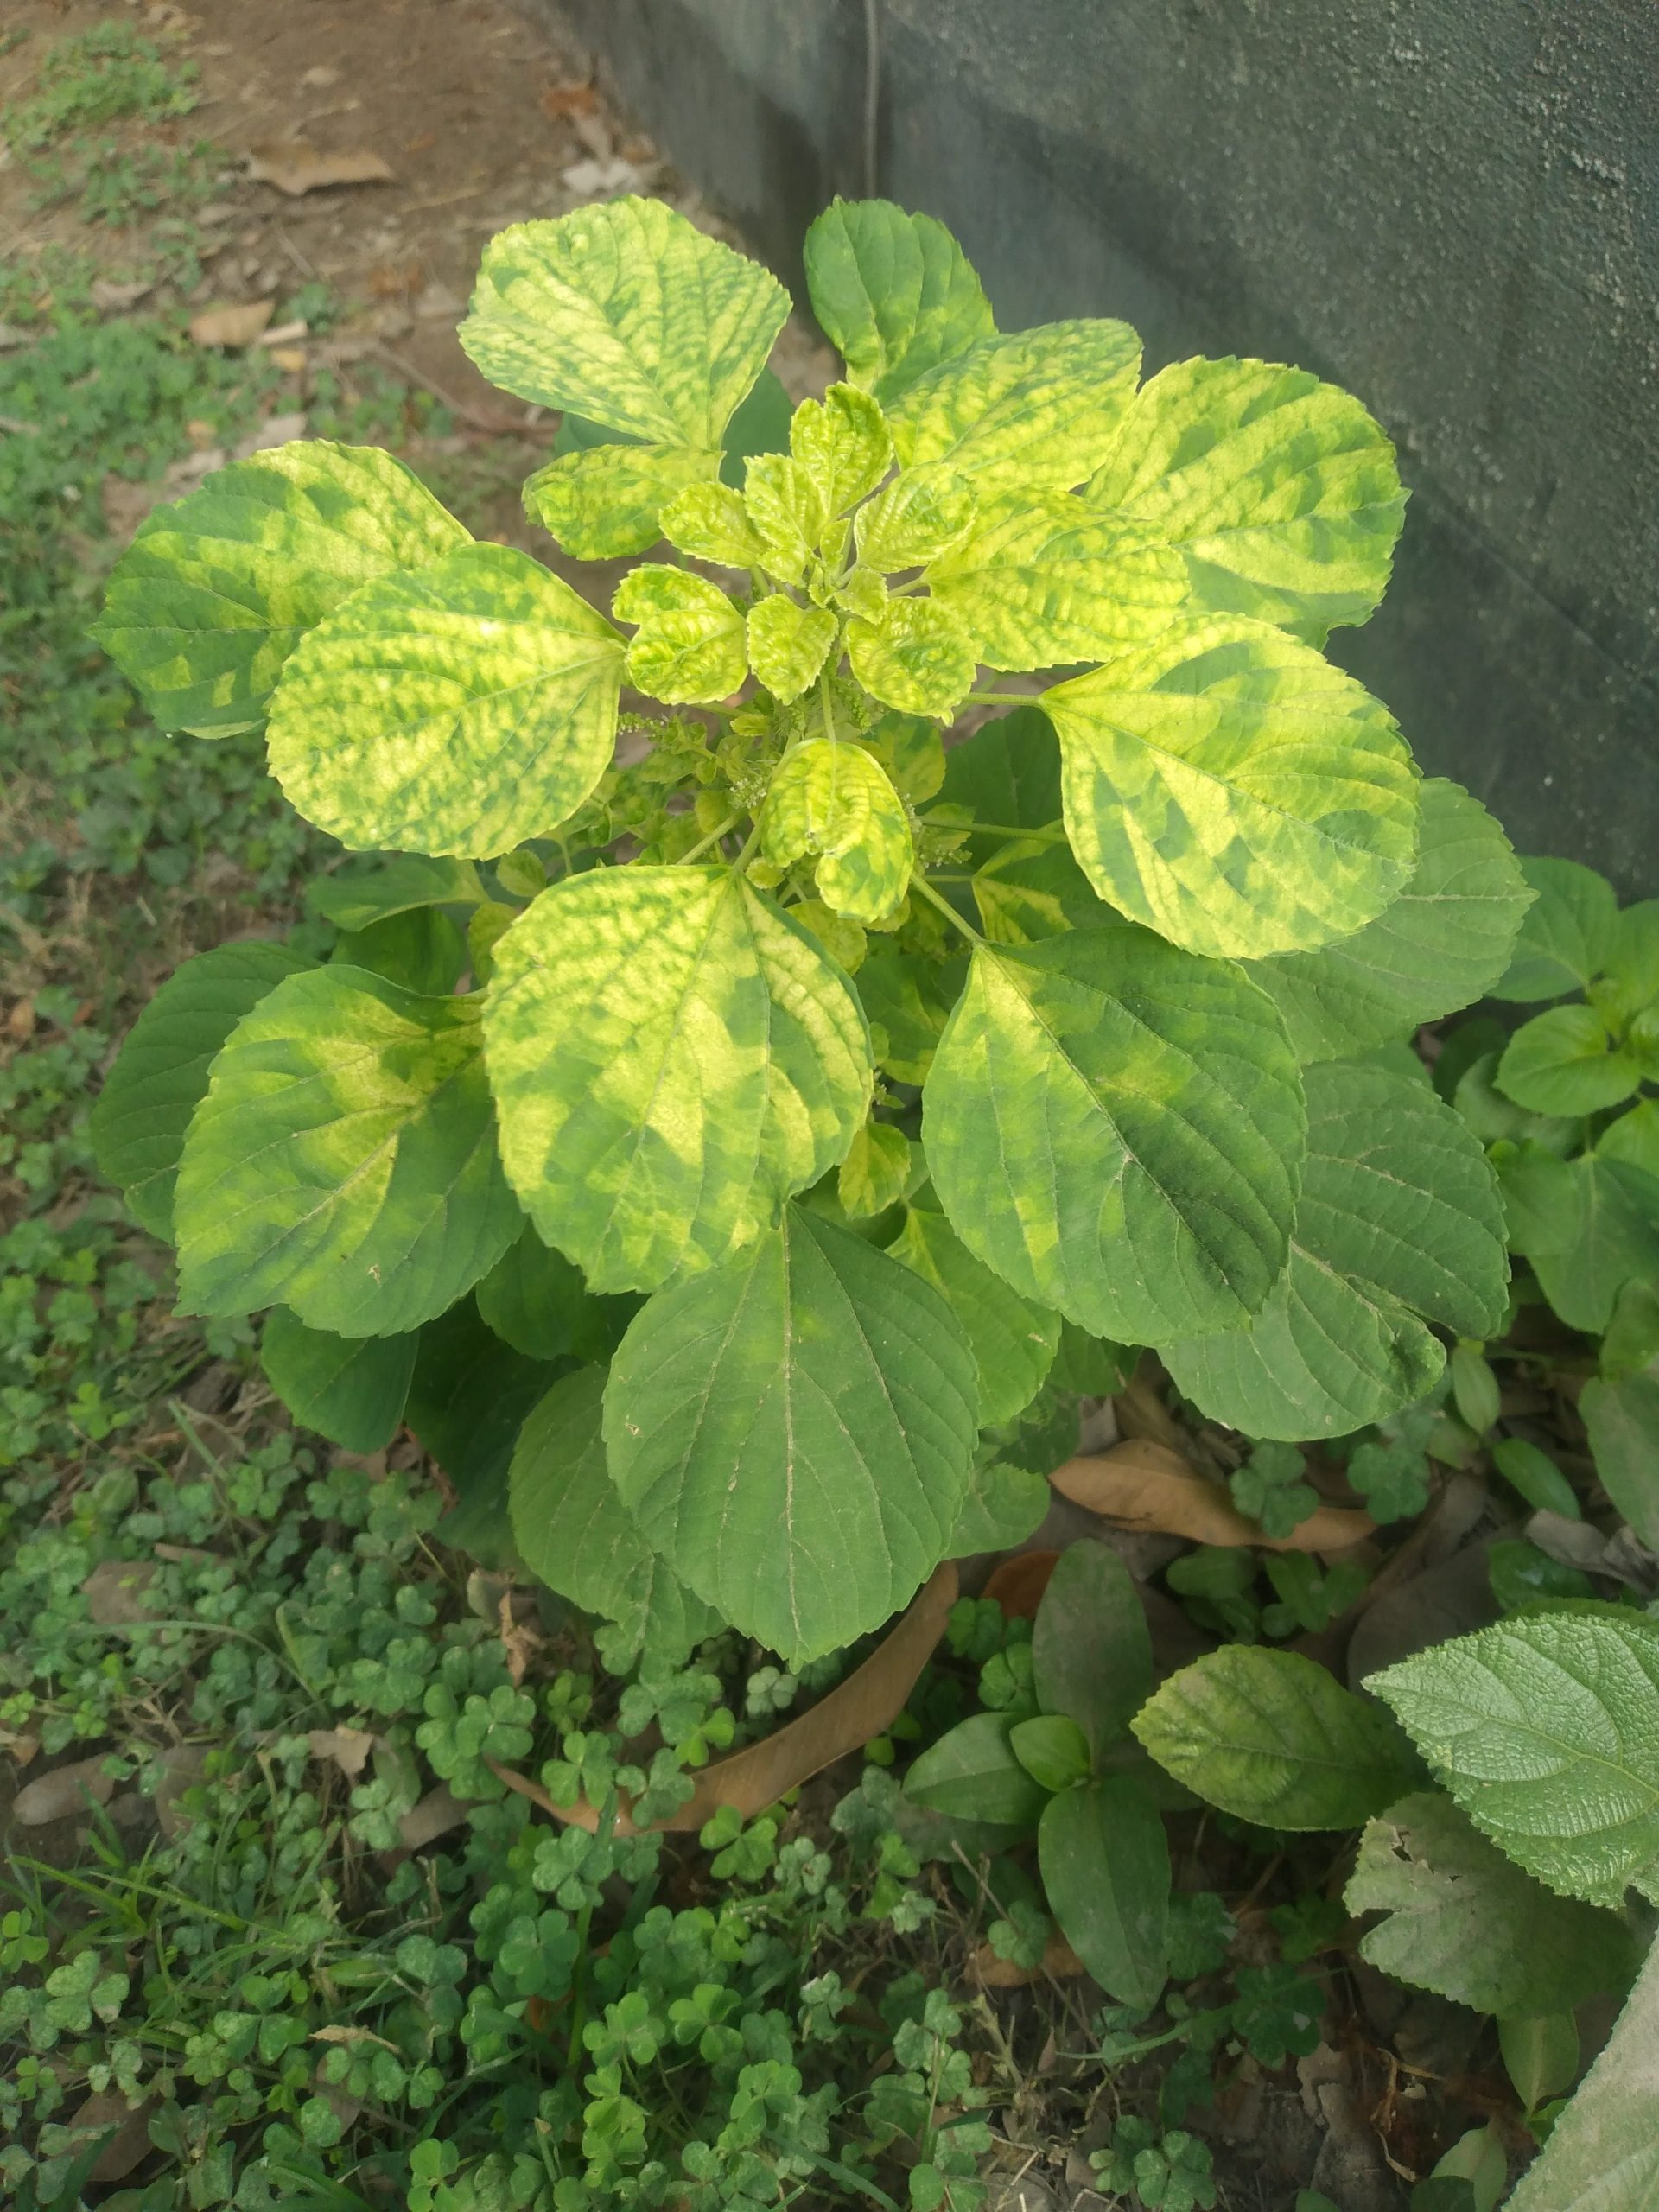 What’s The Health Benefit Of Acalypha Indica & Its Homoeopathic Use.